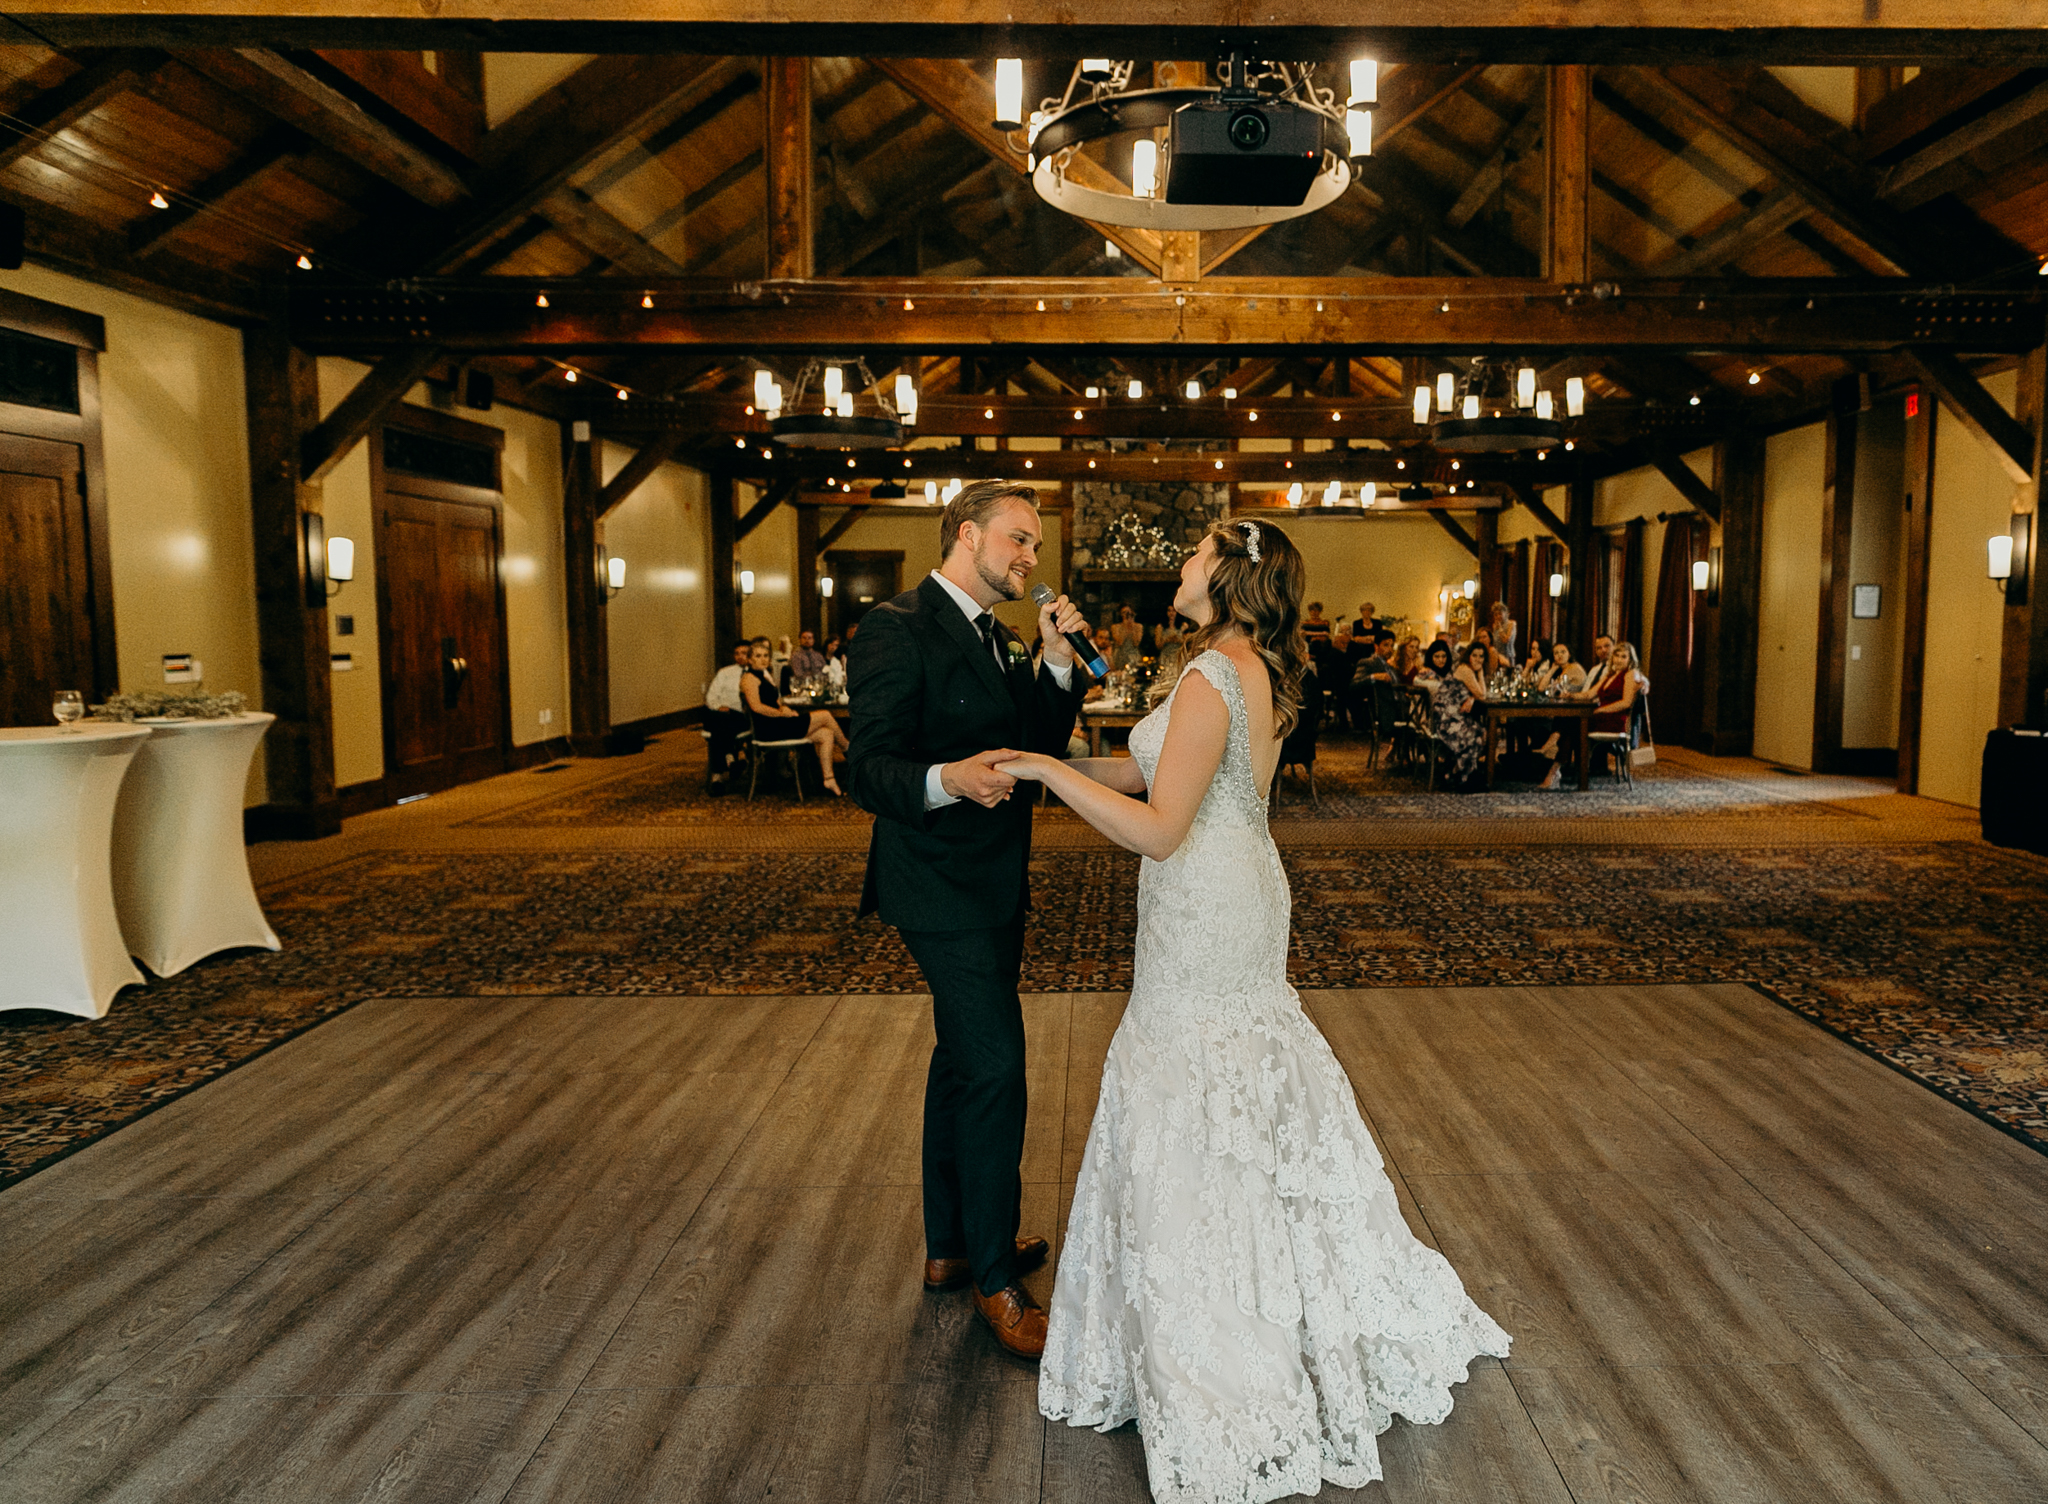 Bride and groom dance during wedding reception at Silvertip Resort in Canmore Alberta romantic wedding photograph MN